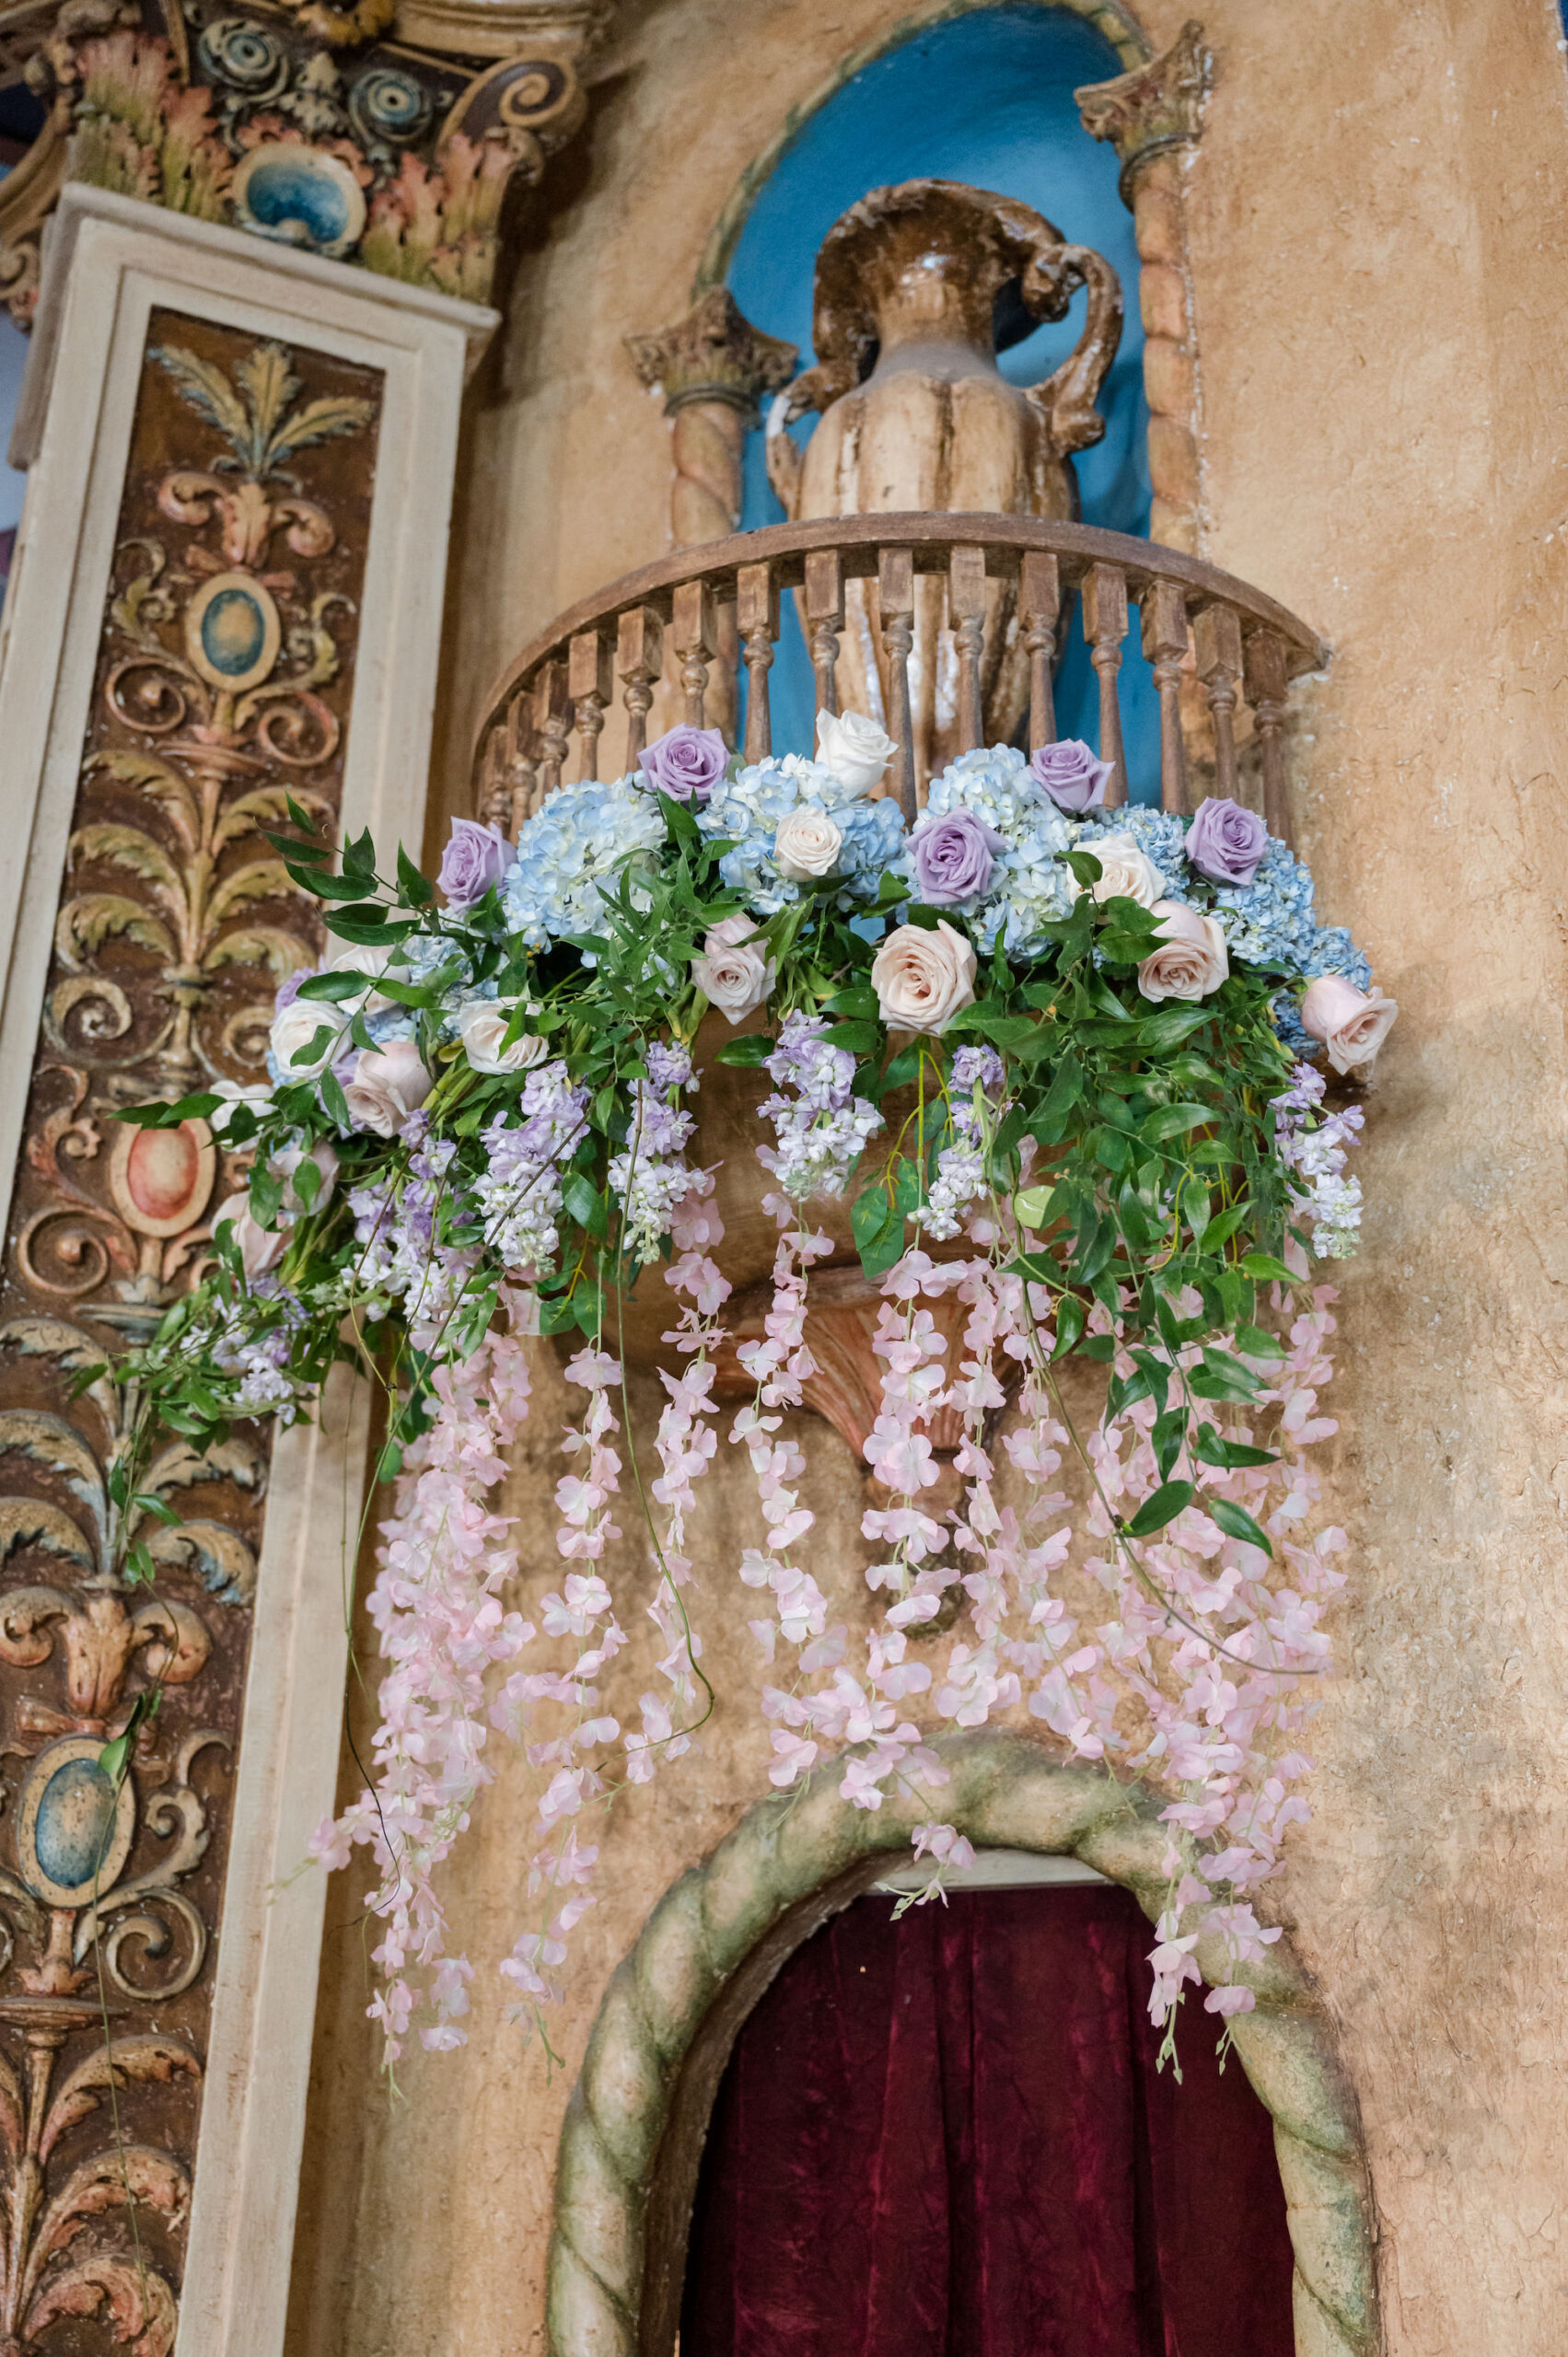 Whimsical Victorian Themed Wedding Inspiration | Pastel Blue Hydrangeas, Purple and Pink Roses Cascading Flower Arrangements | Tampa Bay Florist Save the Date Florida